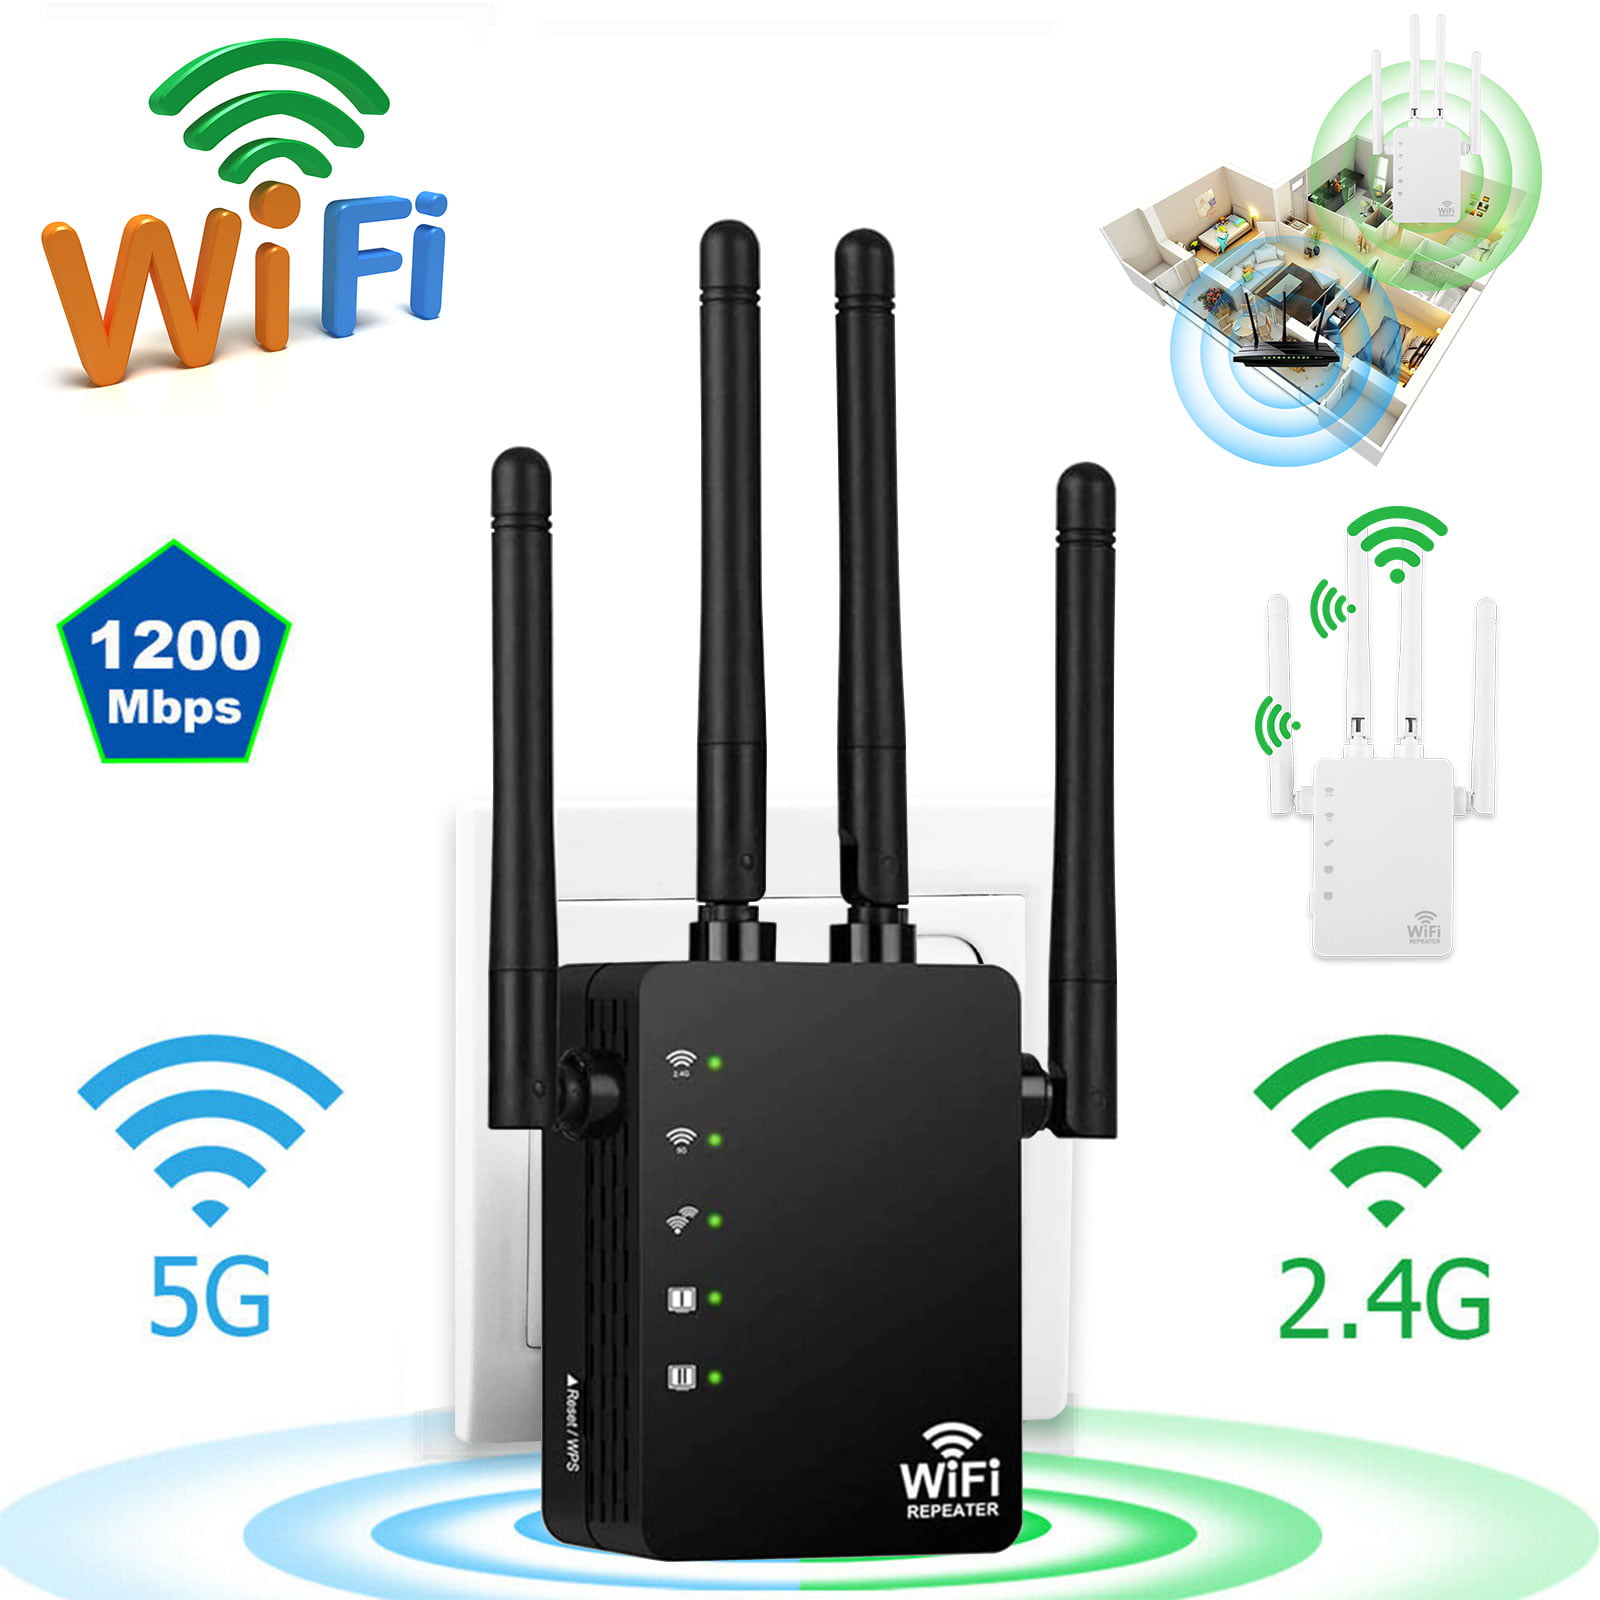 WiFi Range Extender 1200Mbps WiFi Signal Booster 2.4G/5G Dual Network Port 360 Degree Full Coverage Wireless Repeater Internet Signal Booster w/4 Ethernet Antennas US 